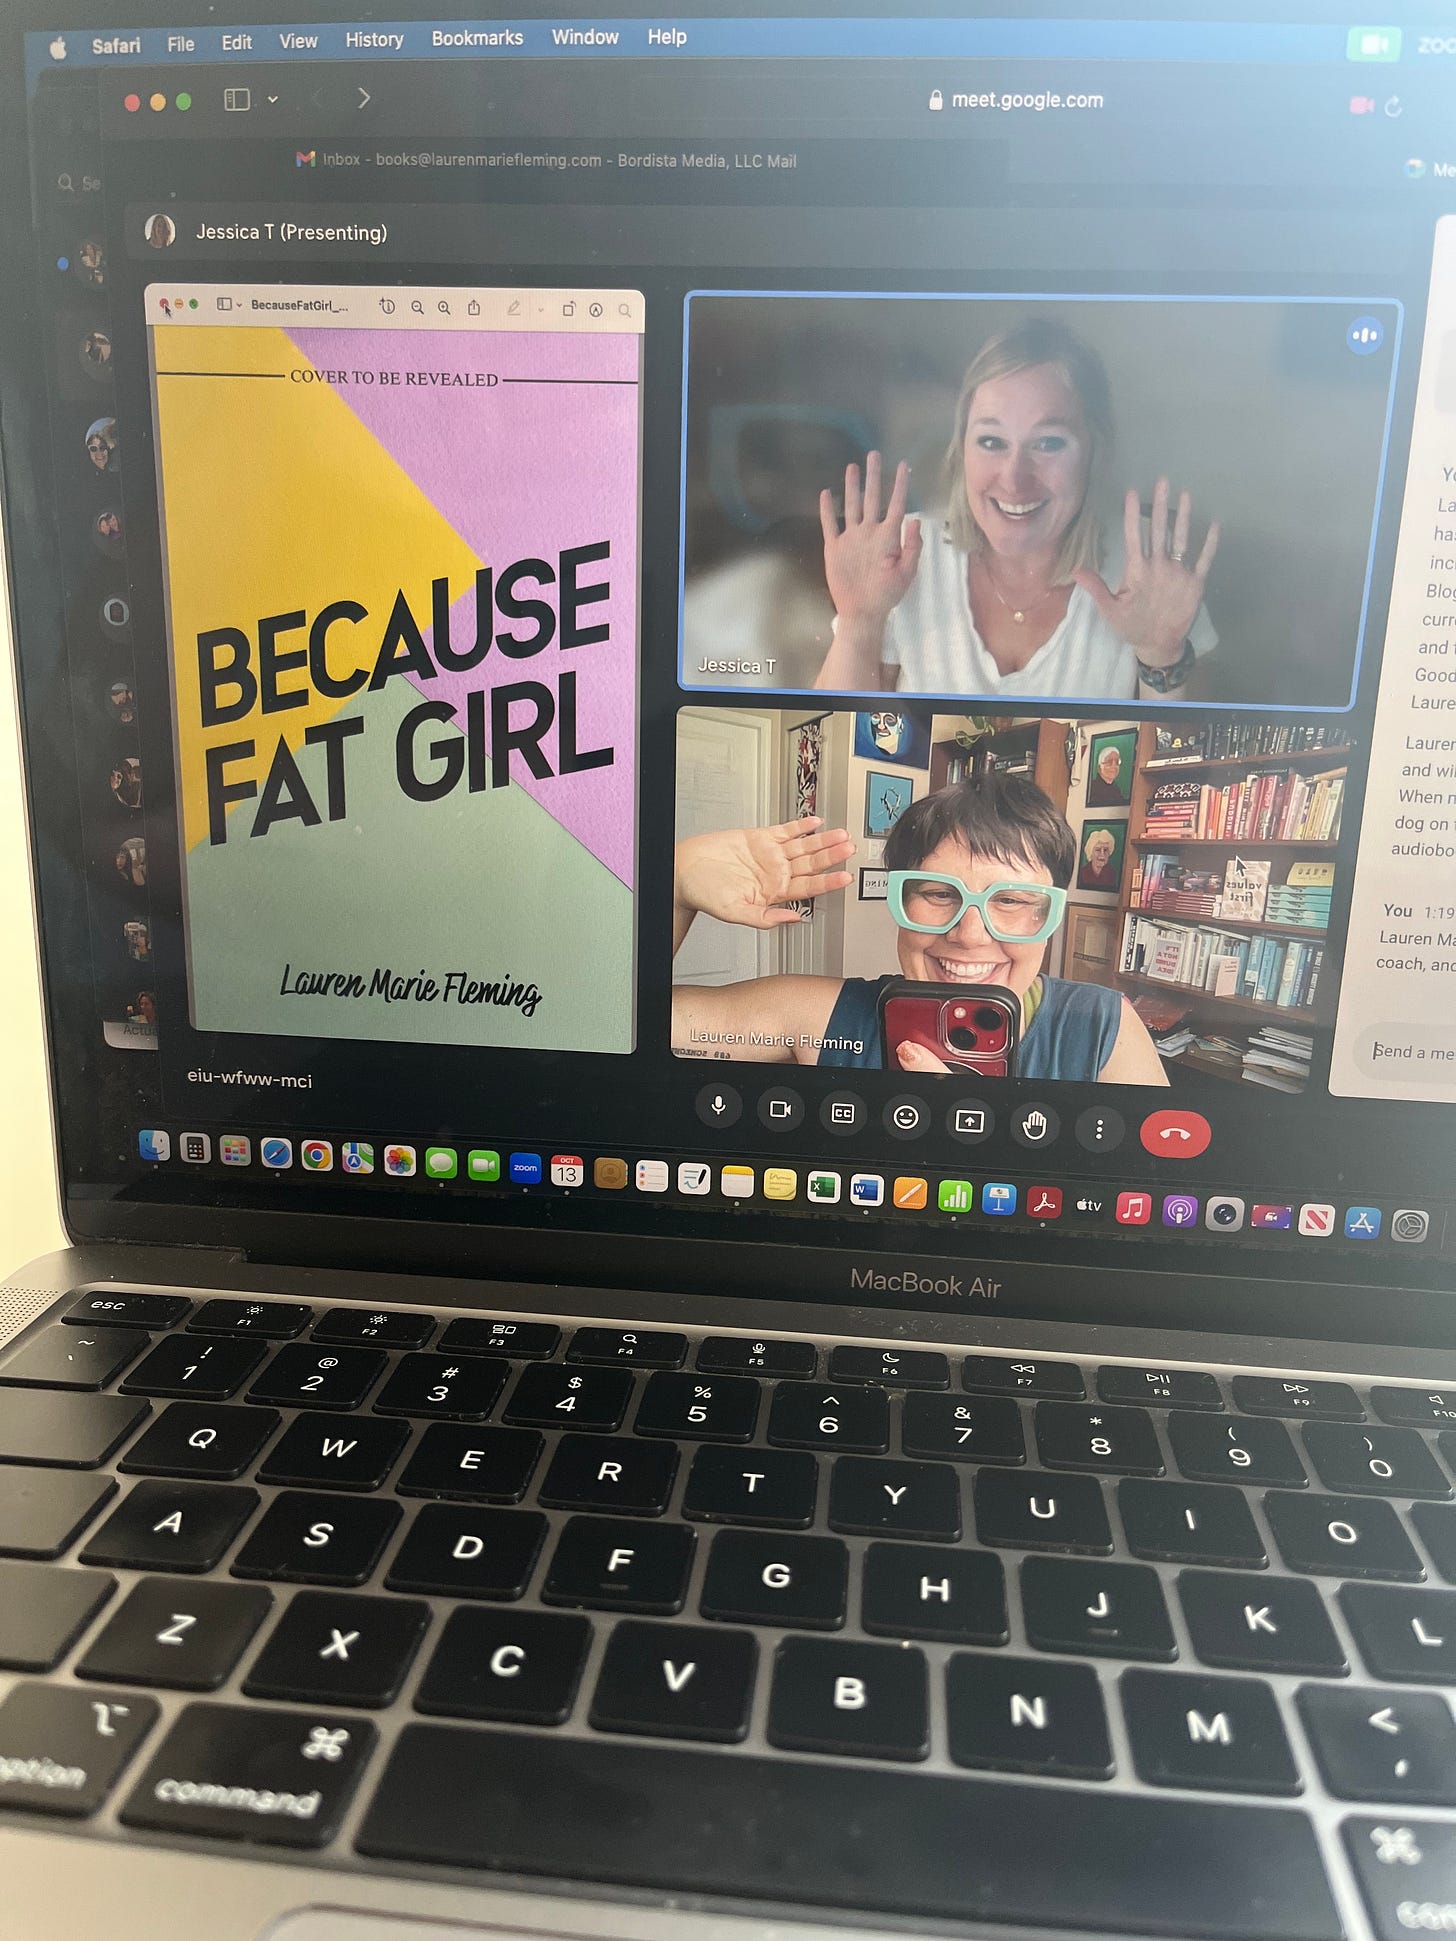 Two people on a zoom on the right, a white blond woman on top doing jax hands, and a brunette white woman on the bottom taking a photo of them. On the left, there is a brightly colored background of a book with "Because Fat Girl" laid over it by Lauren Marie Fleming. The background is geometric with yello, green, and purple tones.